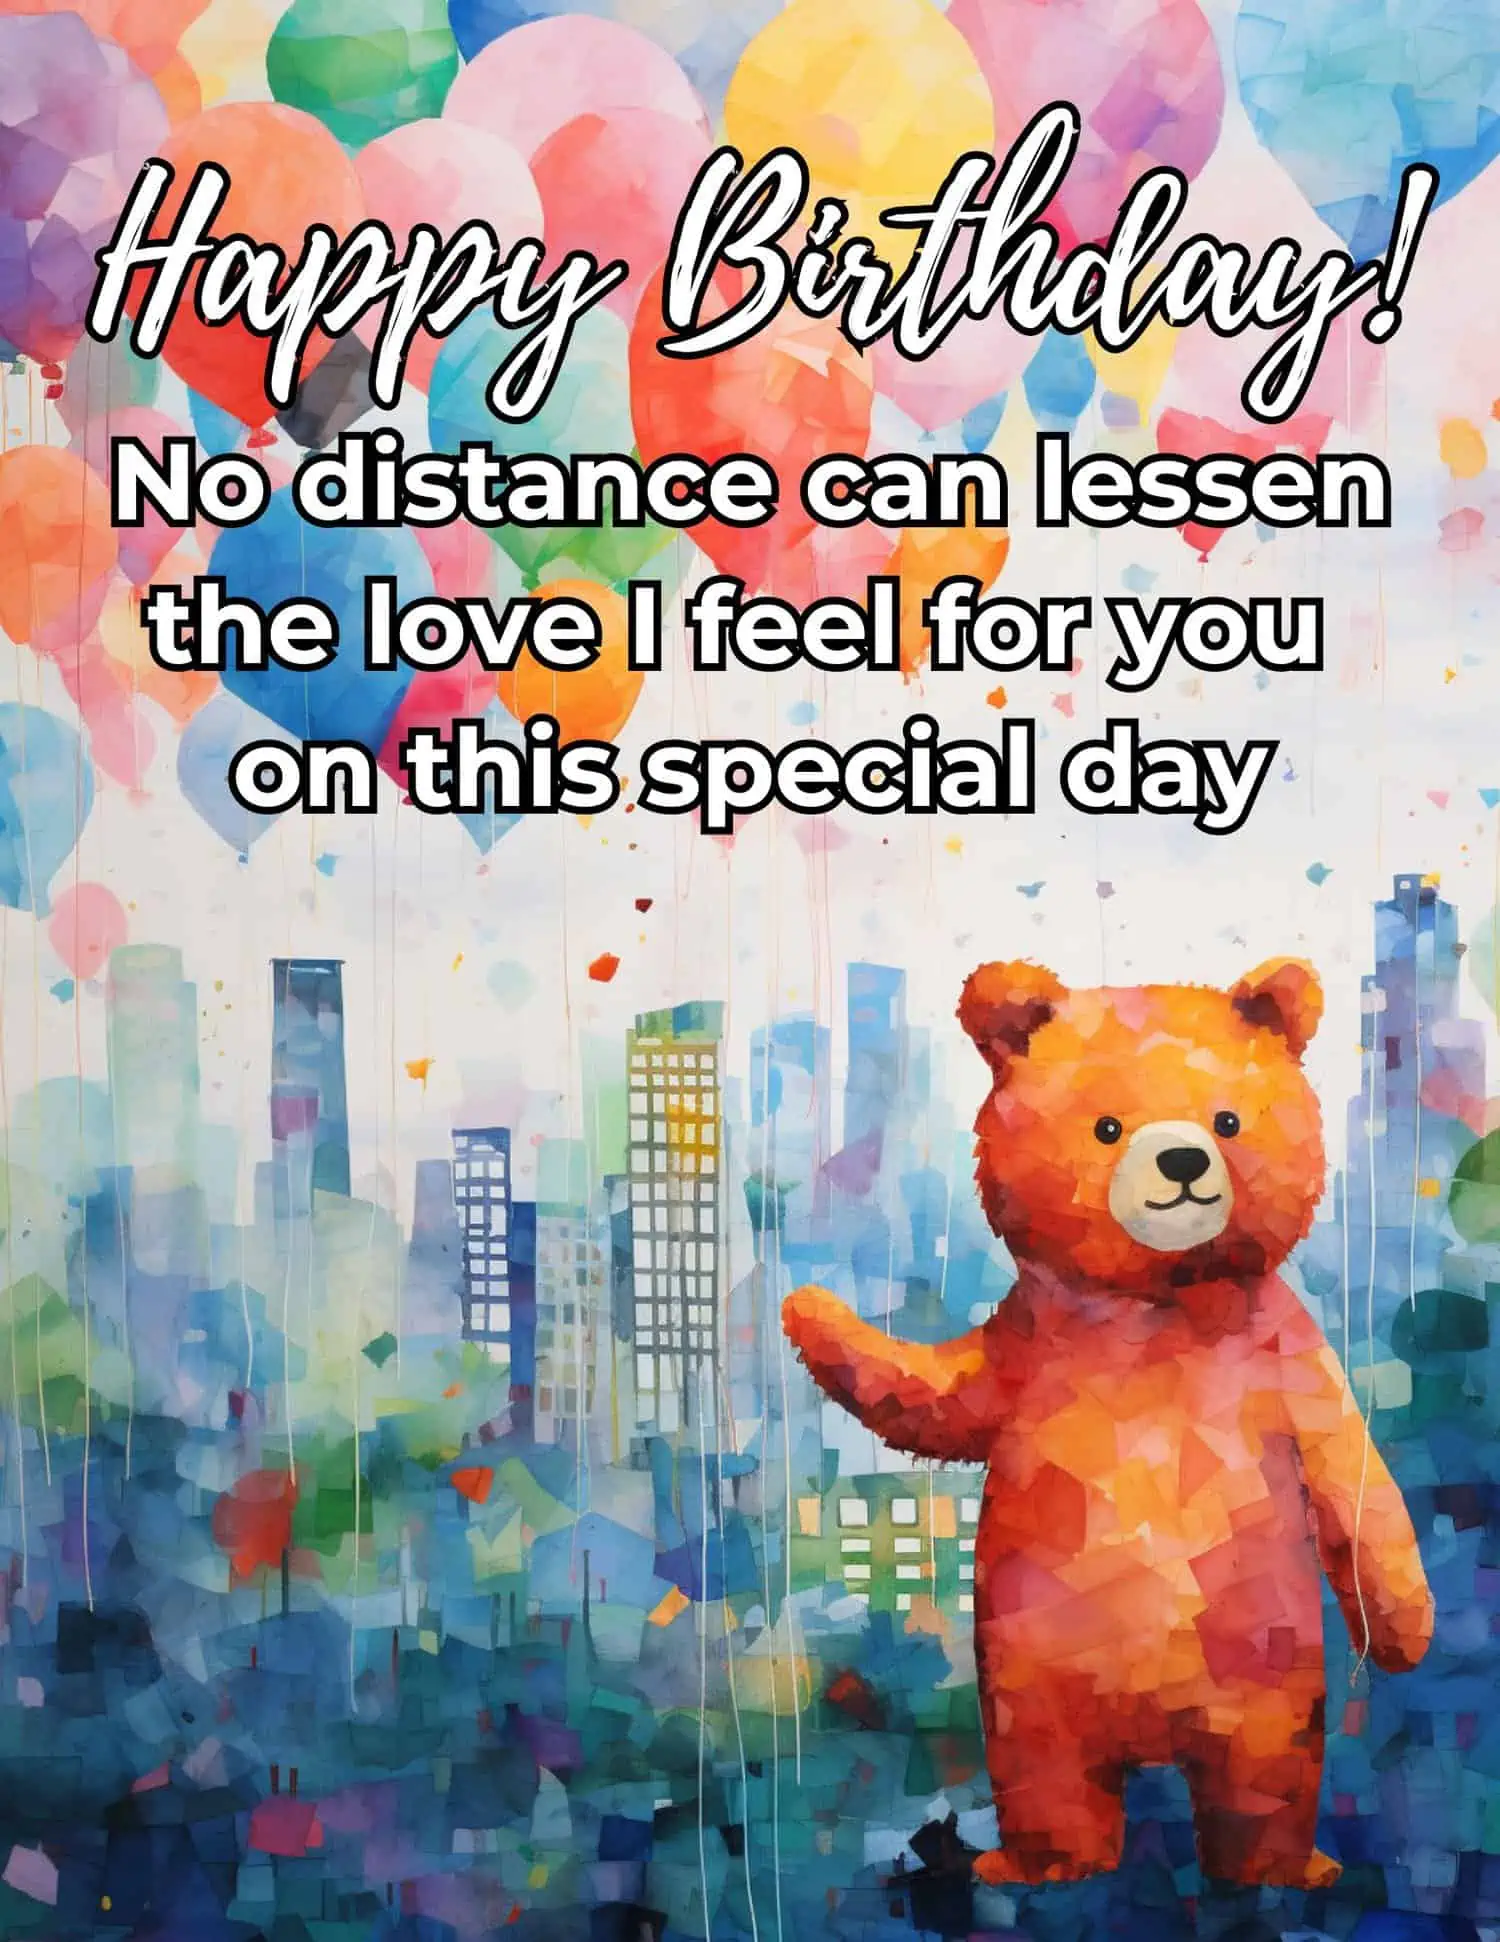 A collection of profound and touching birthday messages, perfect for expressing deep emotions across the miles.